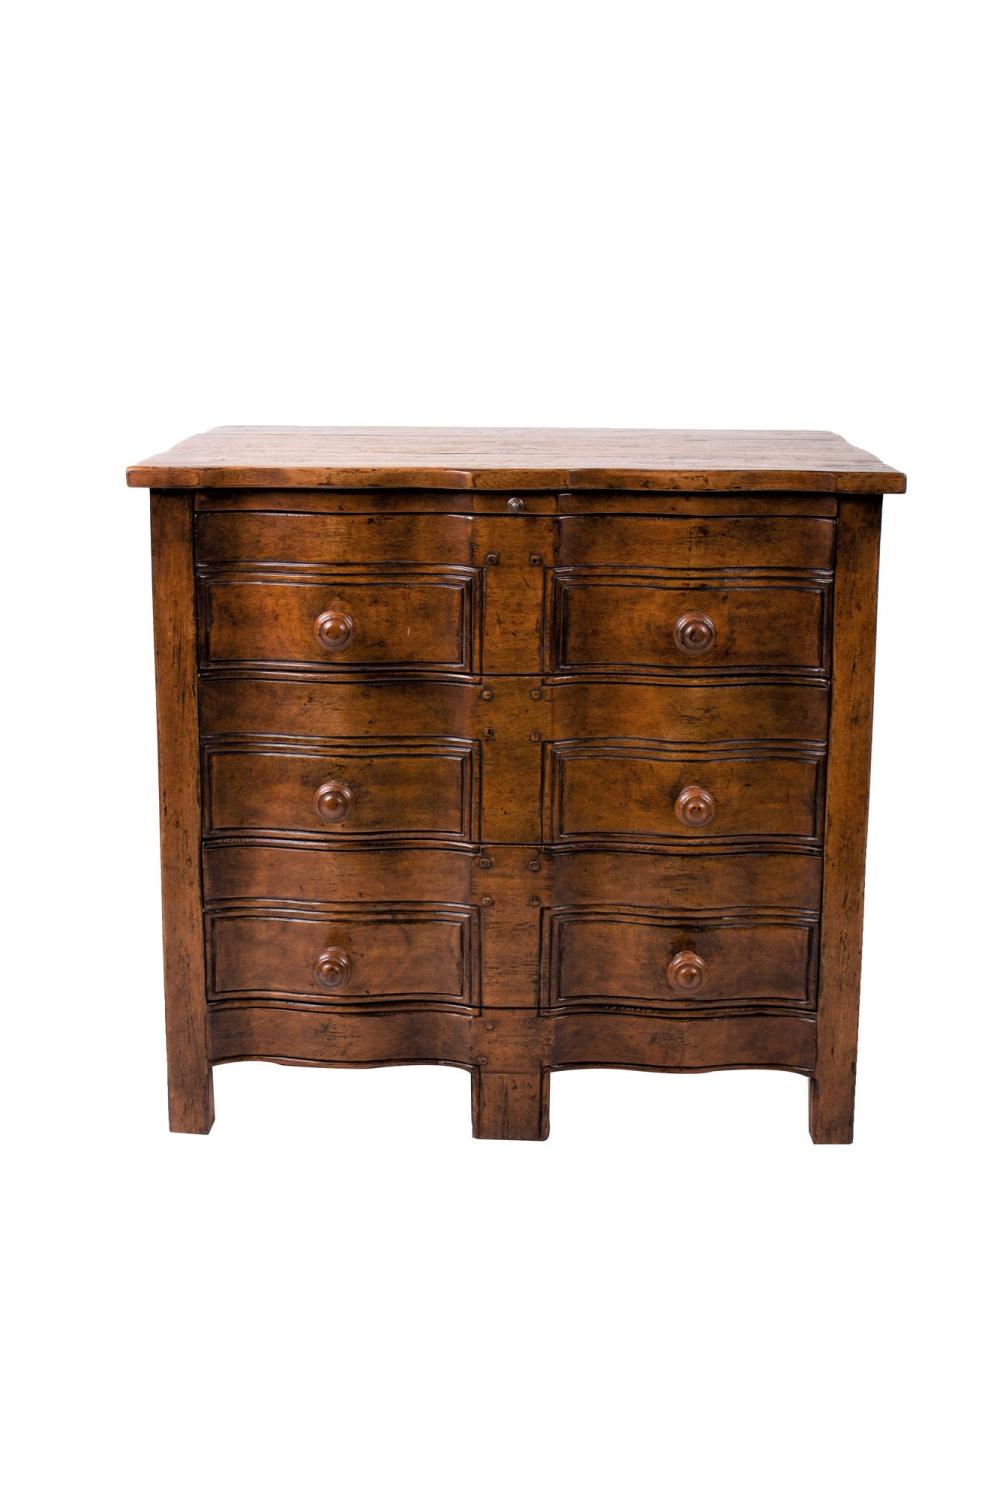 GREGORIUS PINEO ASPEN BEDSIDE CHESTwith